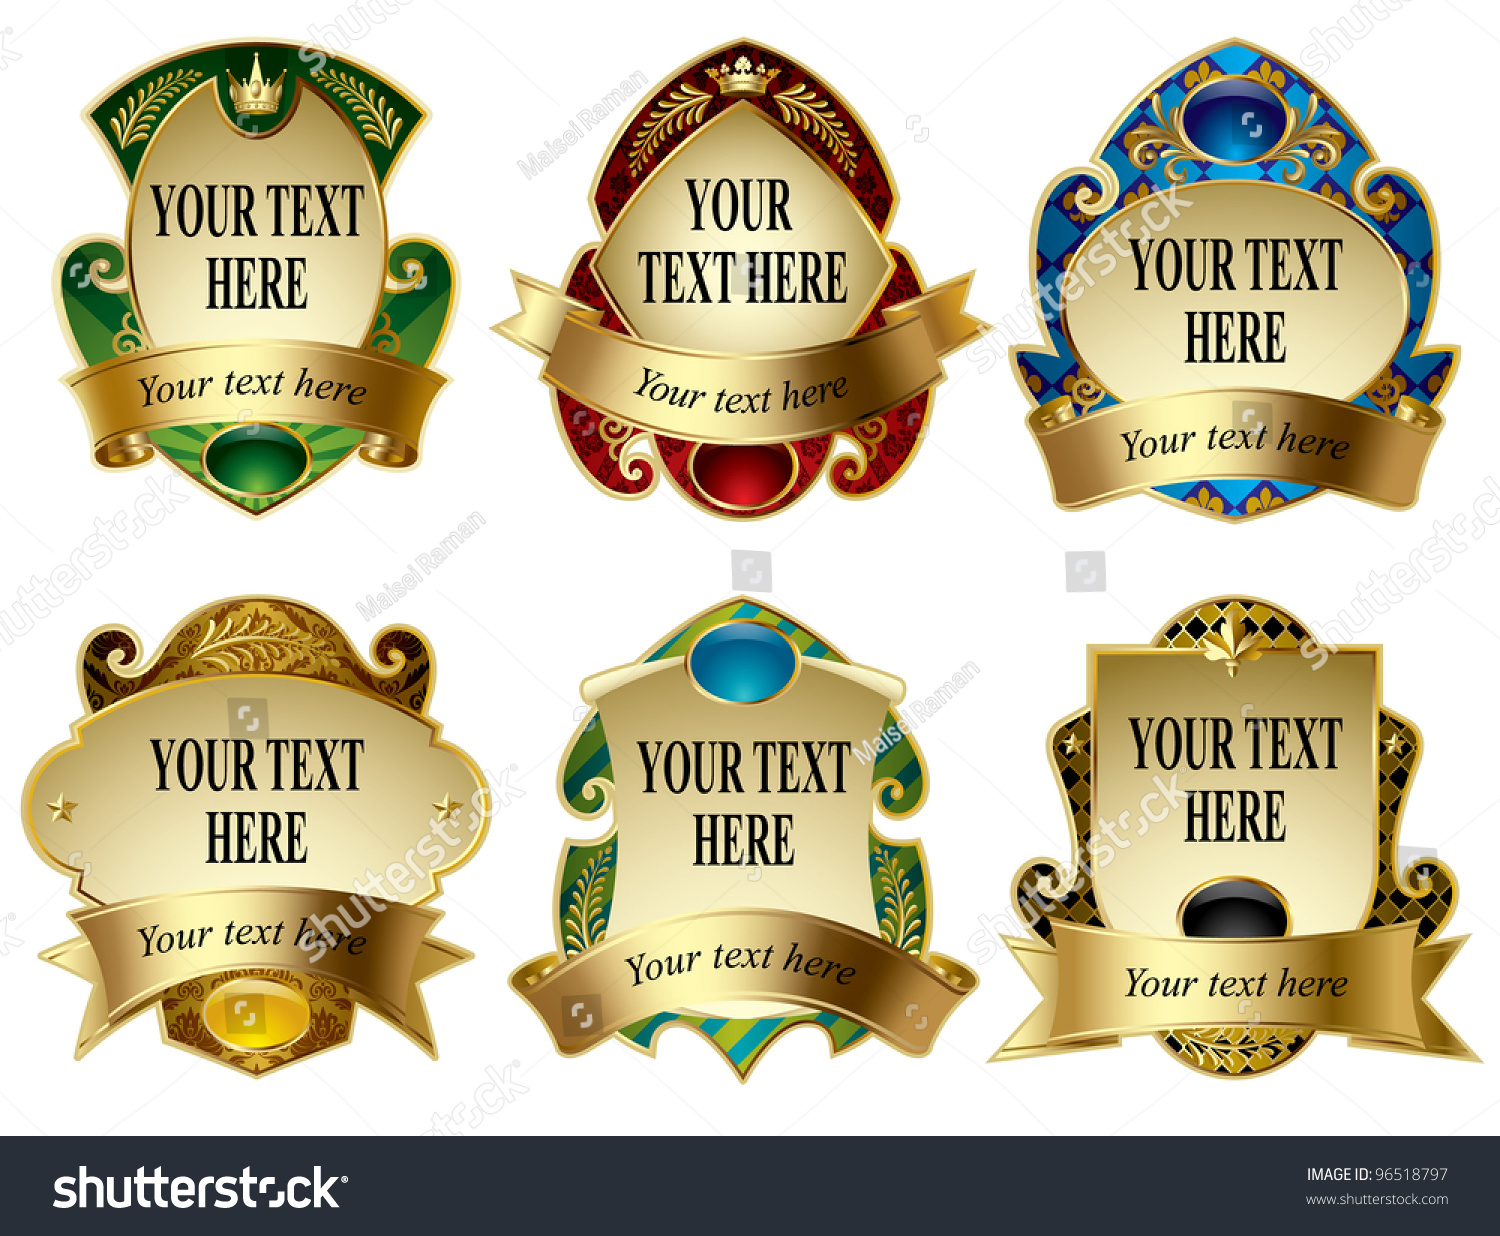 Vector Image Of Six Gold Vintage Labels With Design Elements On White